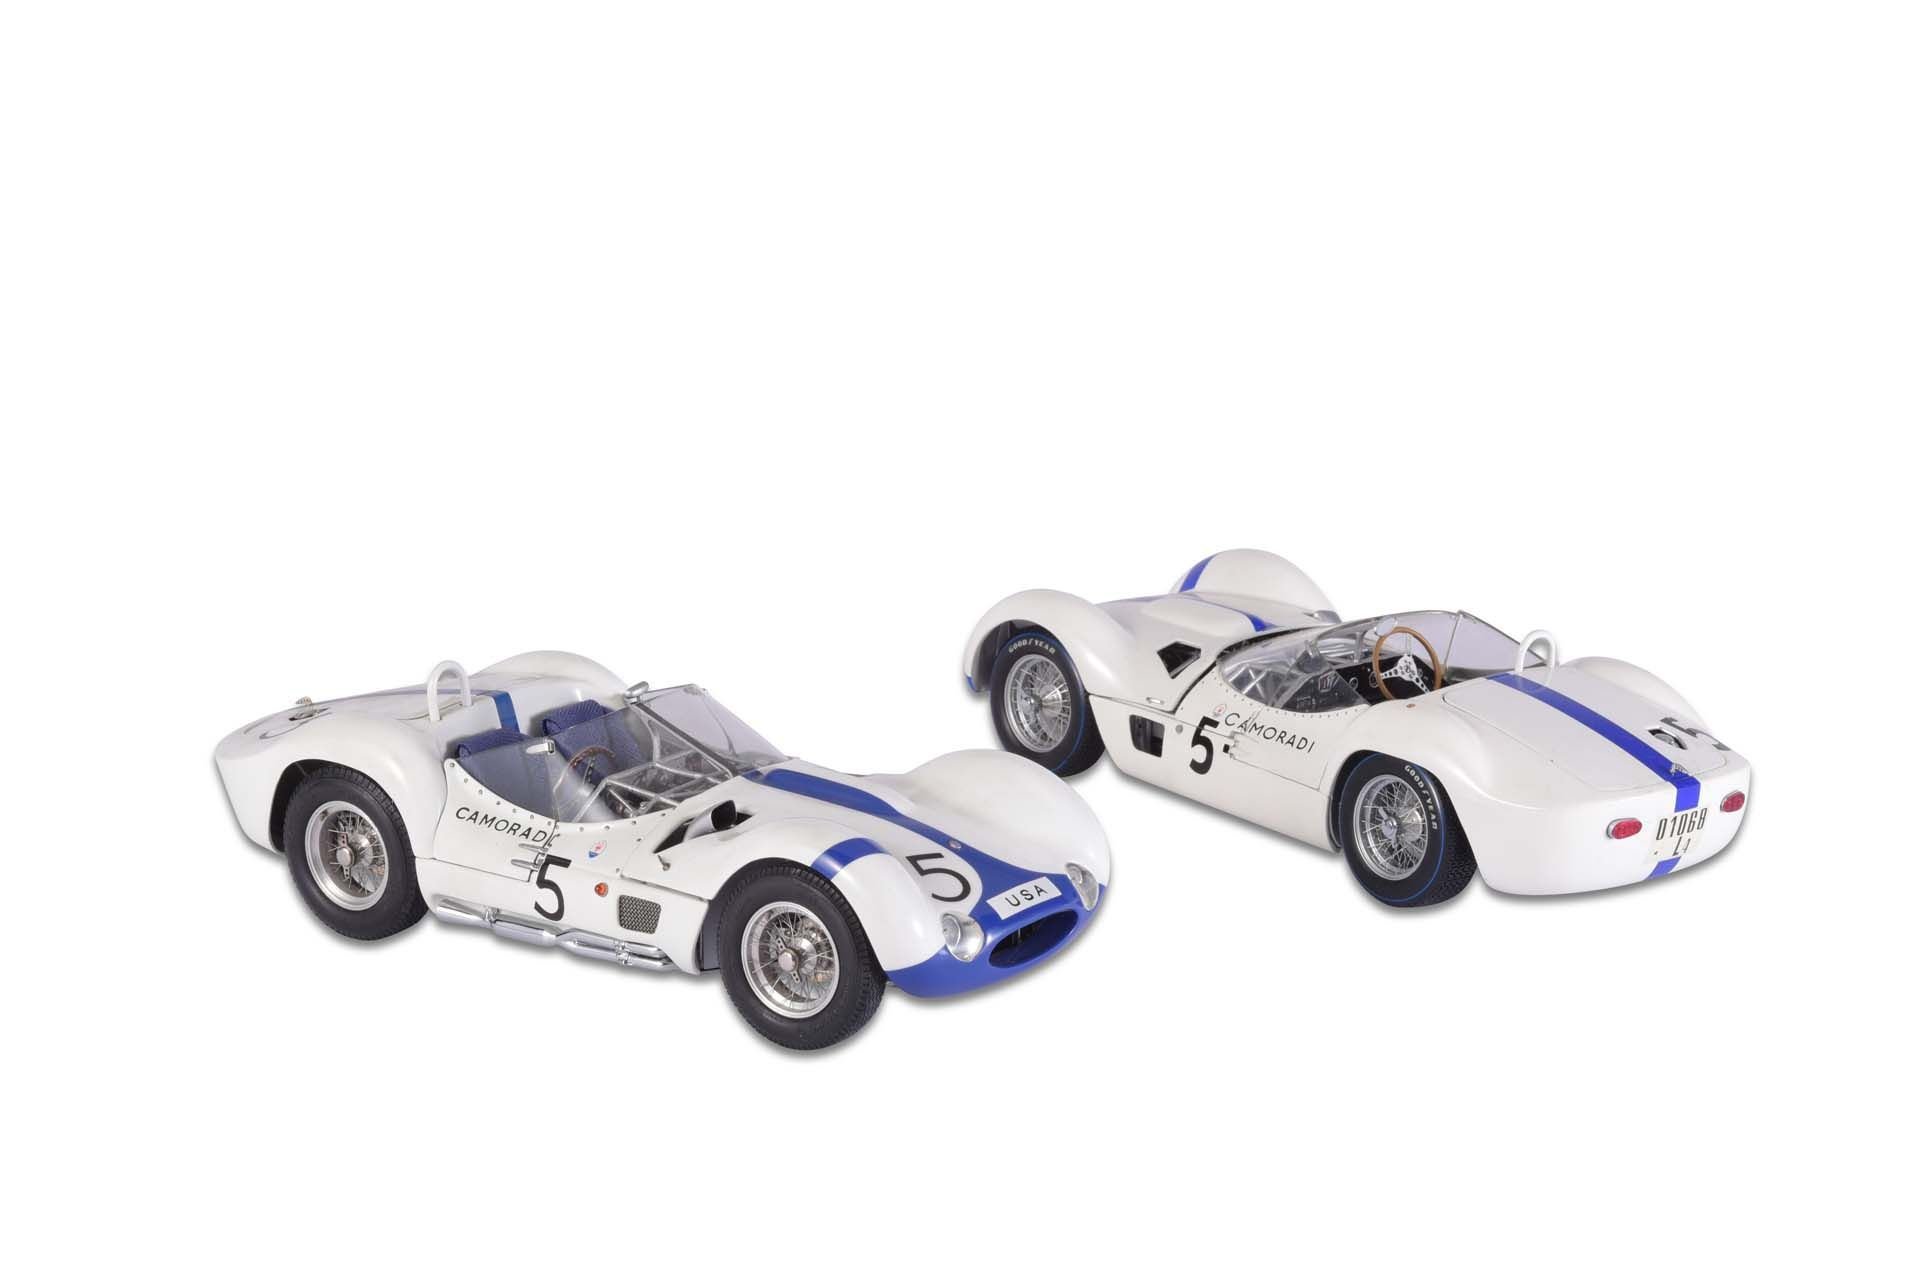 Broad Arrow Auctions | Pair of 1960 Maserati Tipo 61 Birdcage Cars